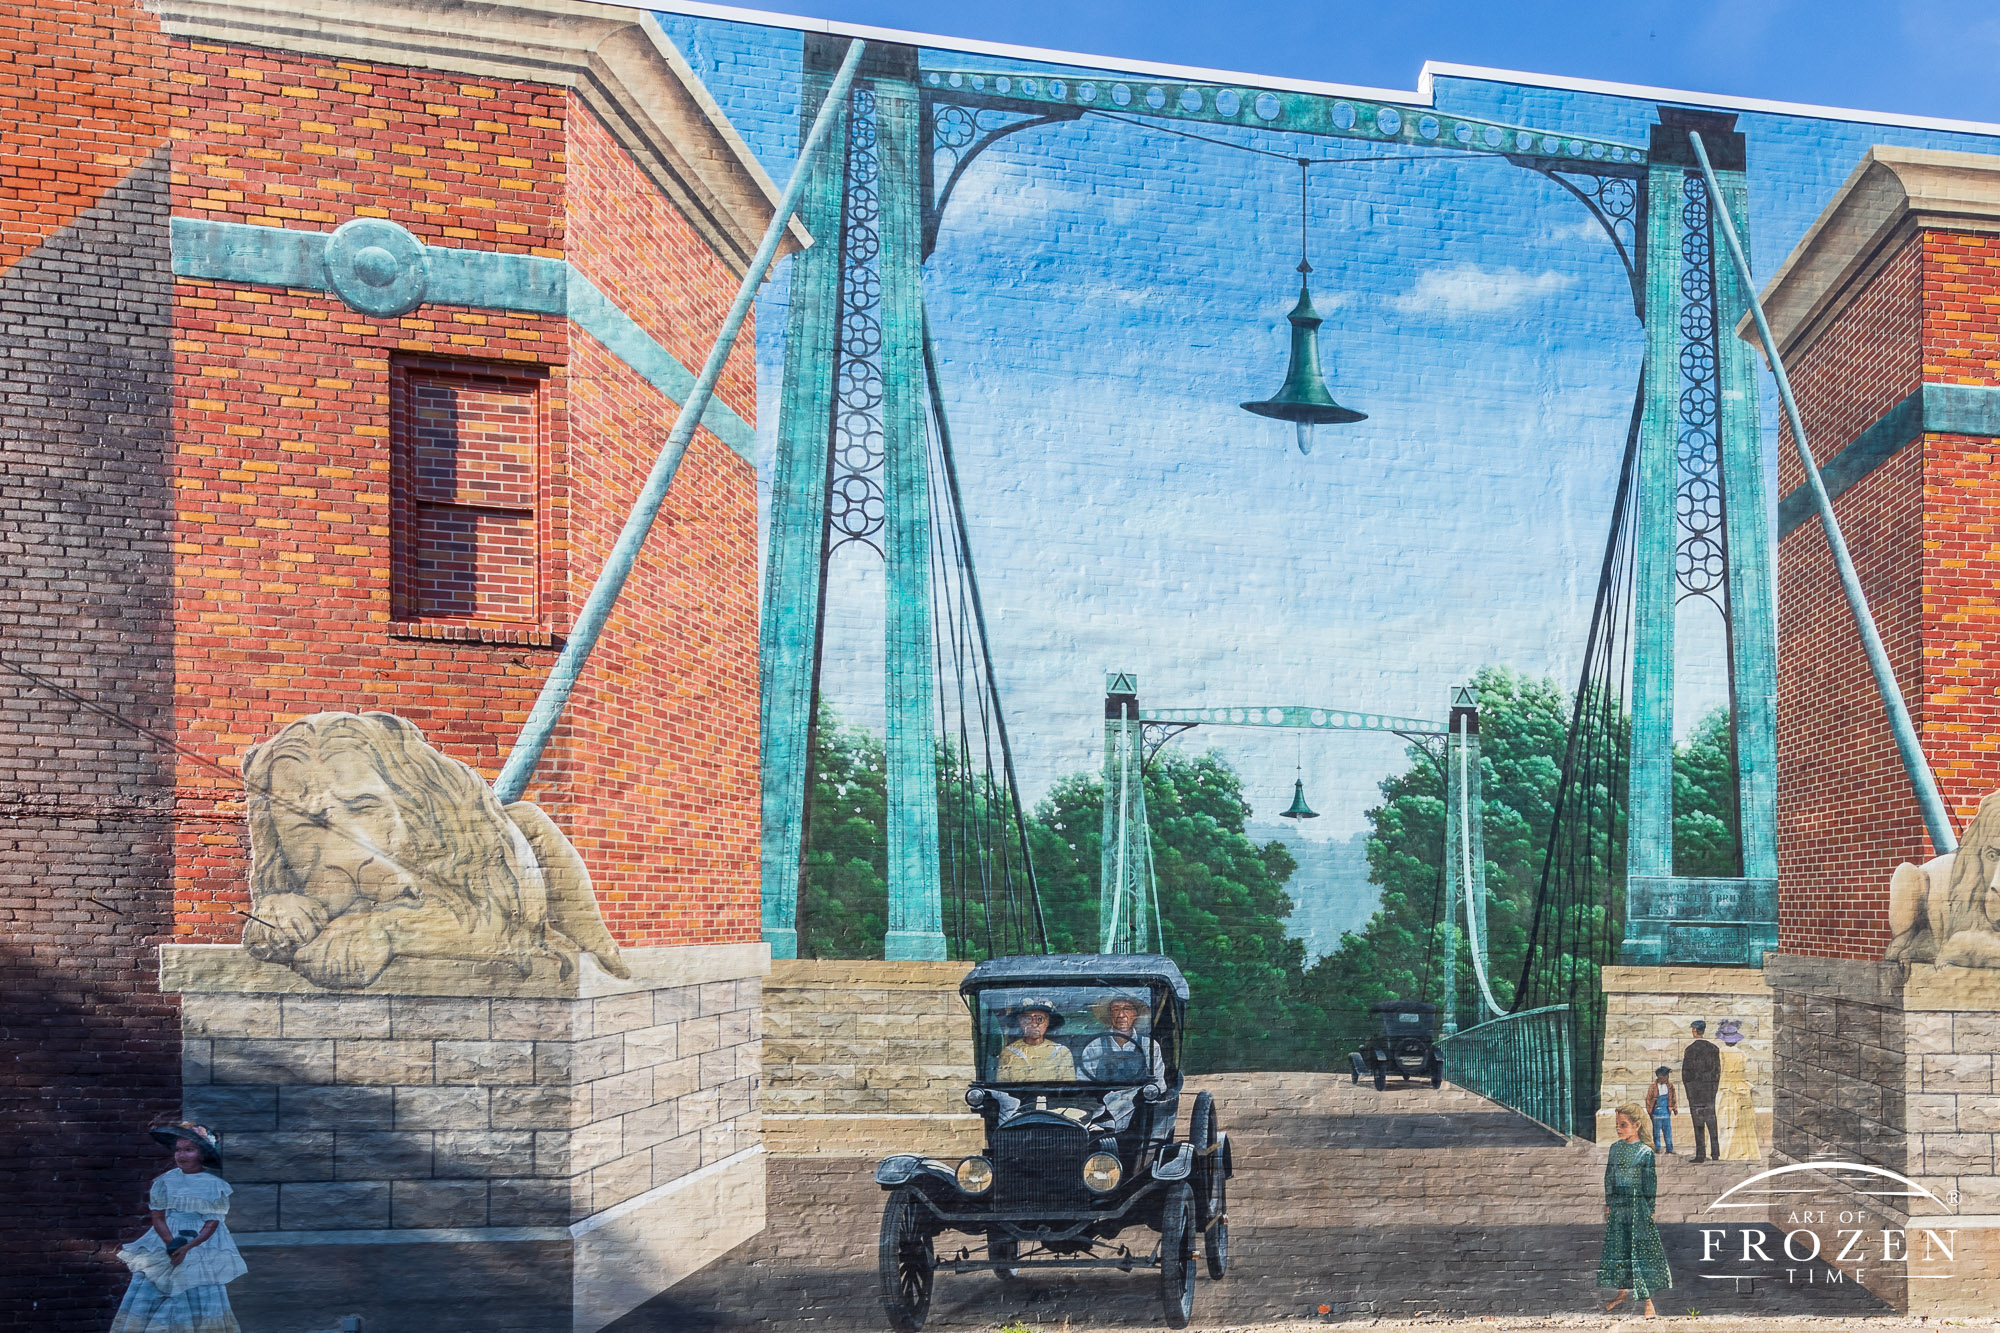 A mural depicting Franklin Ohio from one hundred years ago as Model T cross the Lion Bridge spanning the Great Miami River